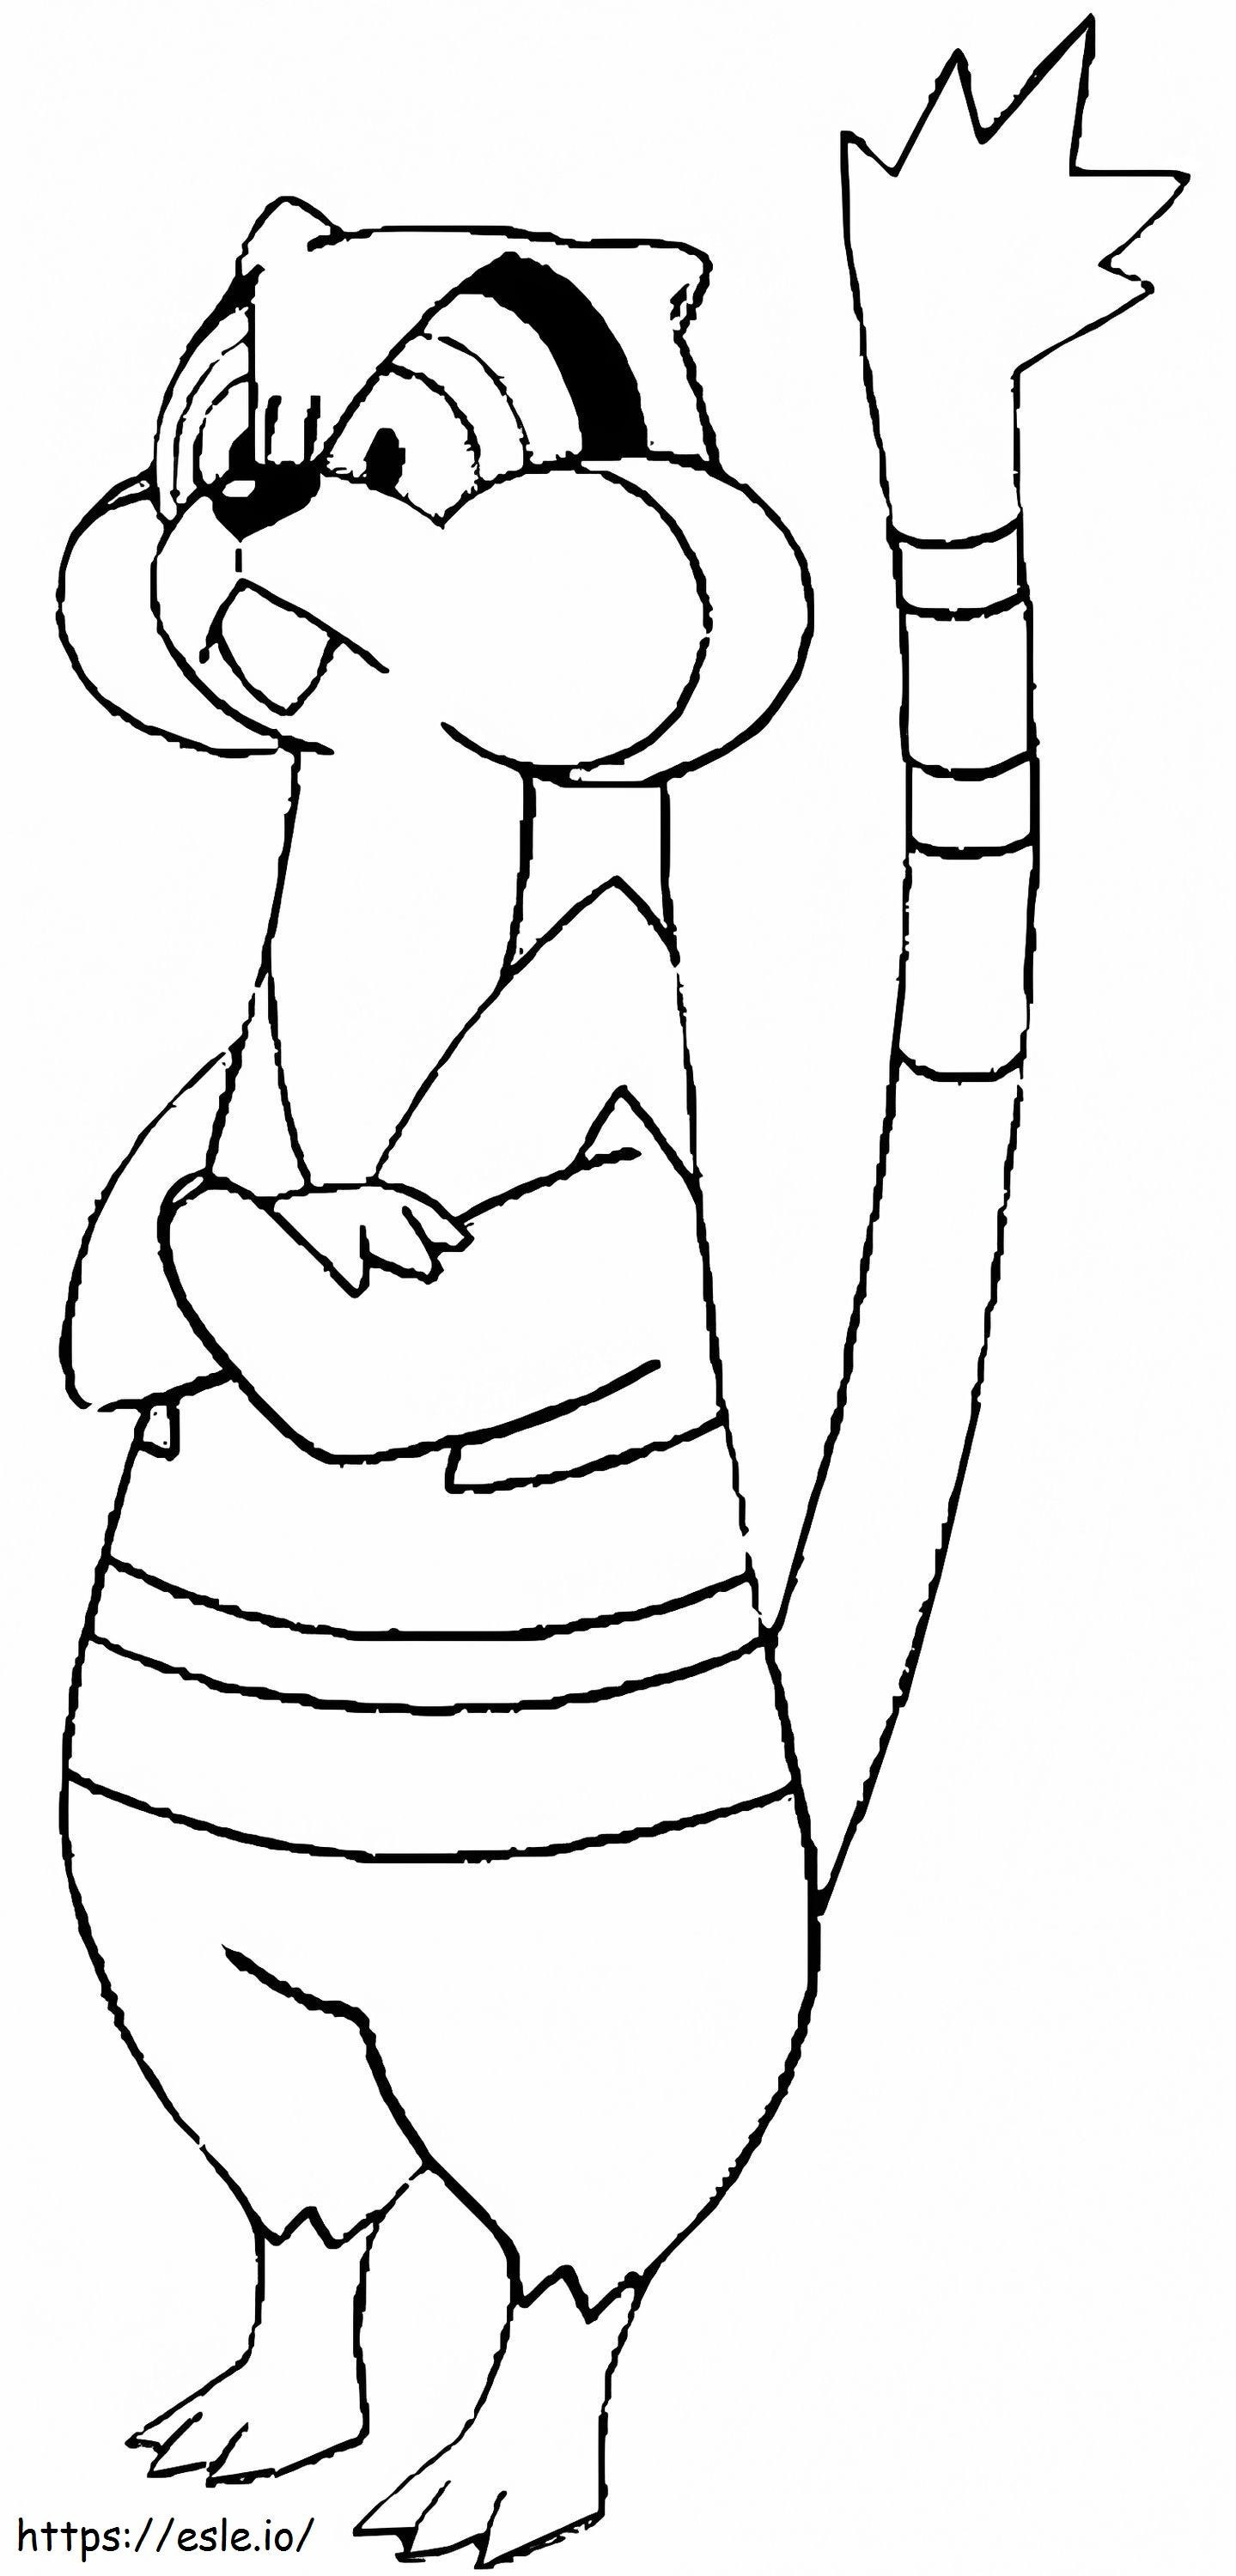 Watchog 1 Coloring Only coloring page